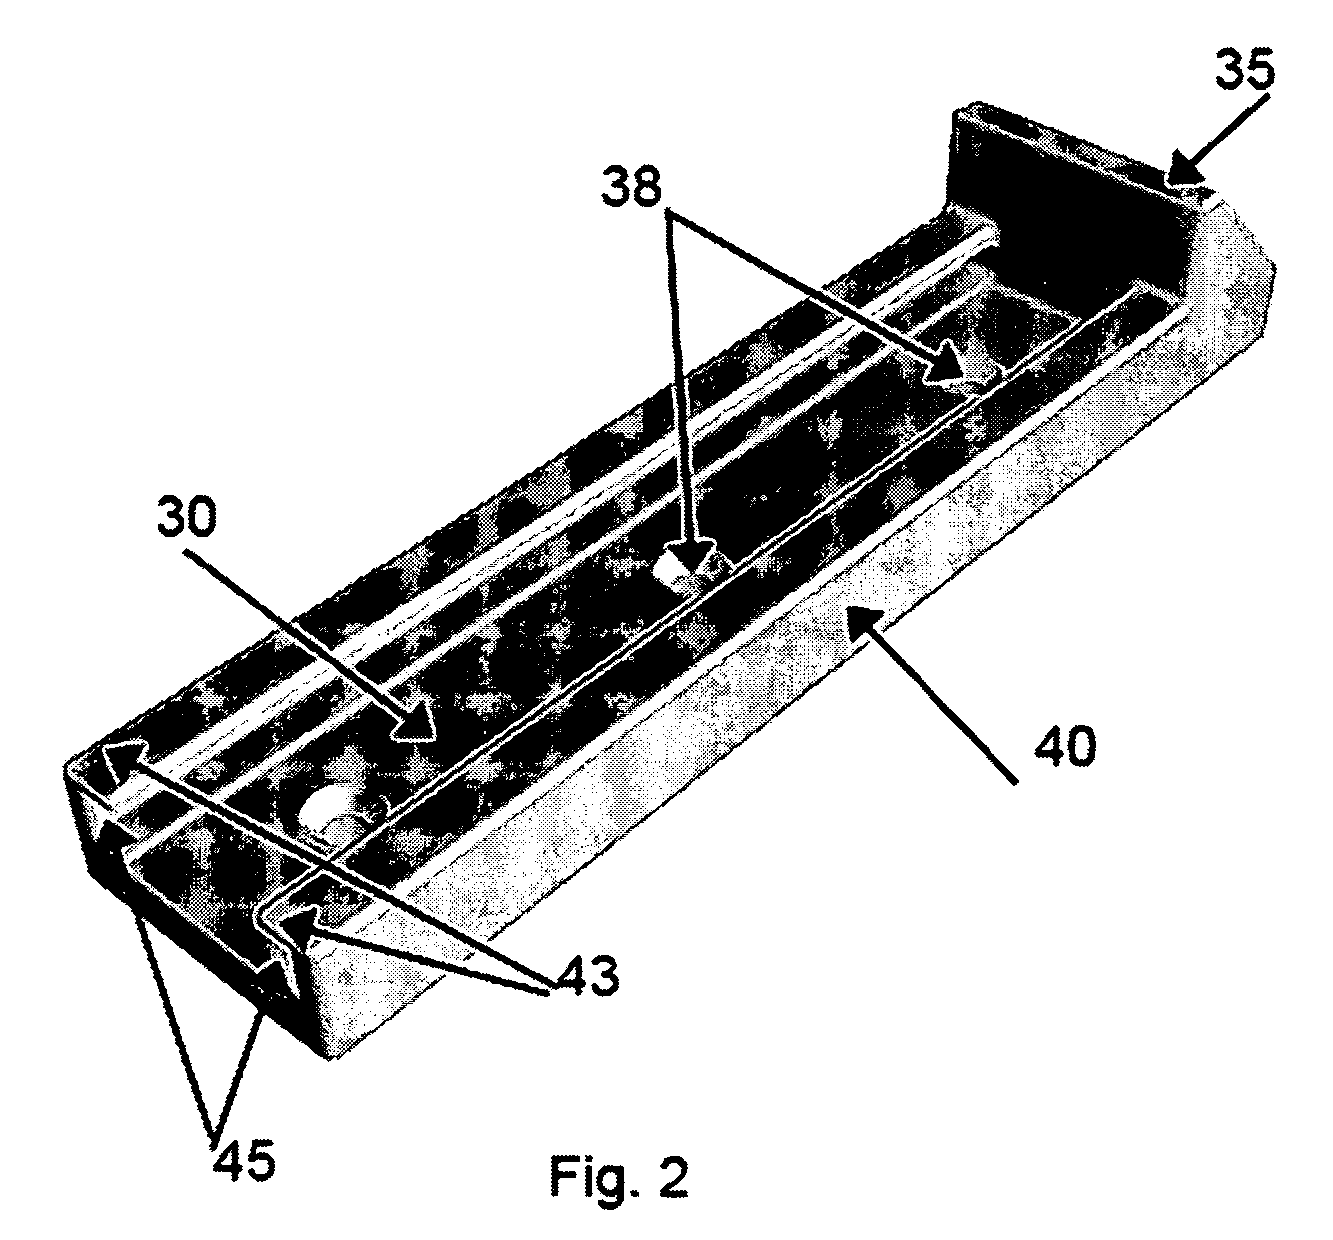 Method and apparatus for parallett and ballet bar fixture